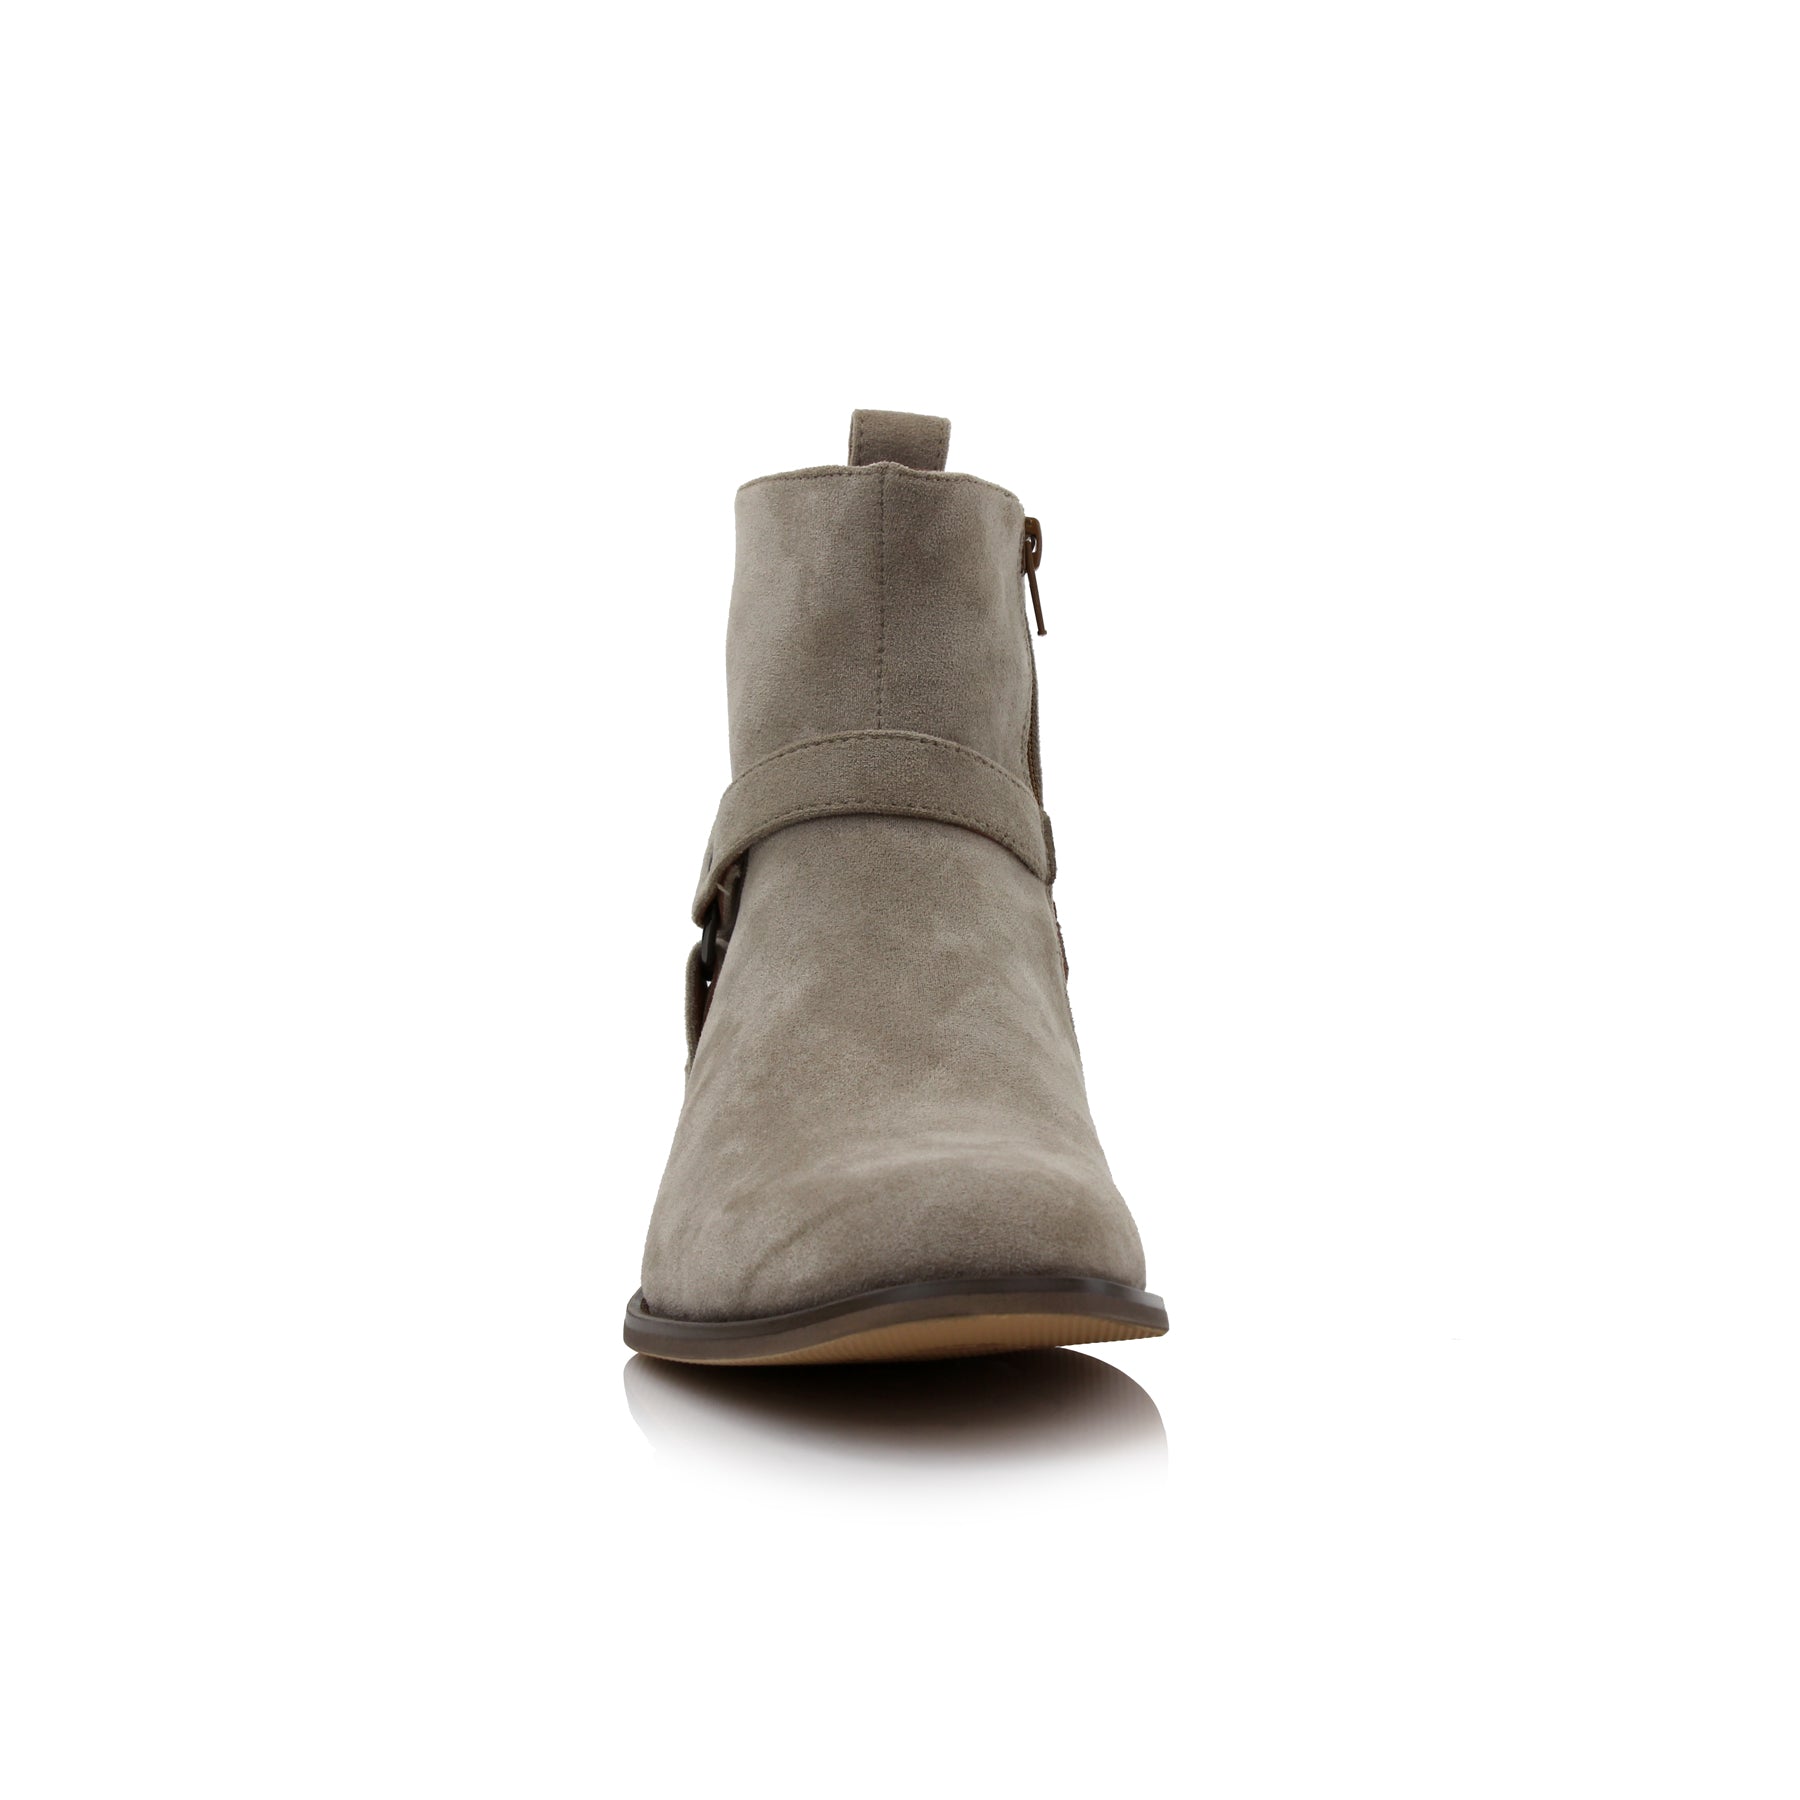 Suede Modern Western Ankle Boots | Rhett by Polar Fox | Conal Footwear | Front Angle View